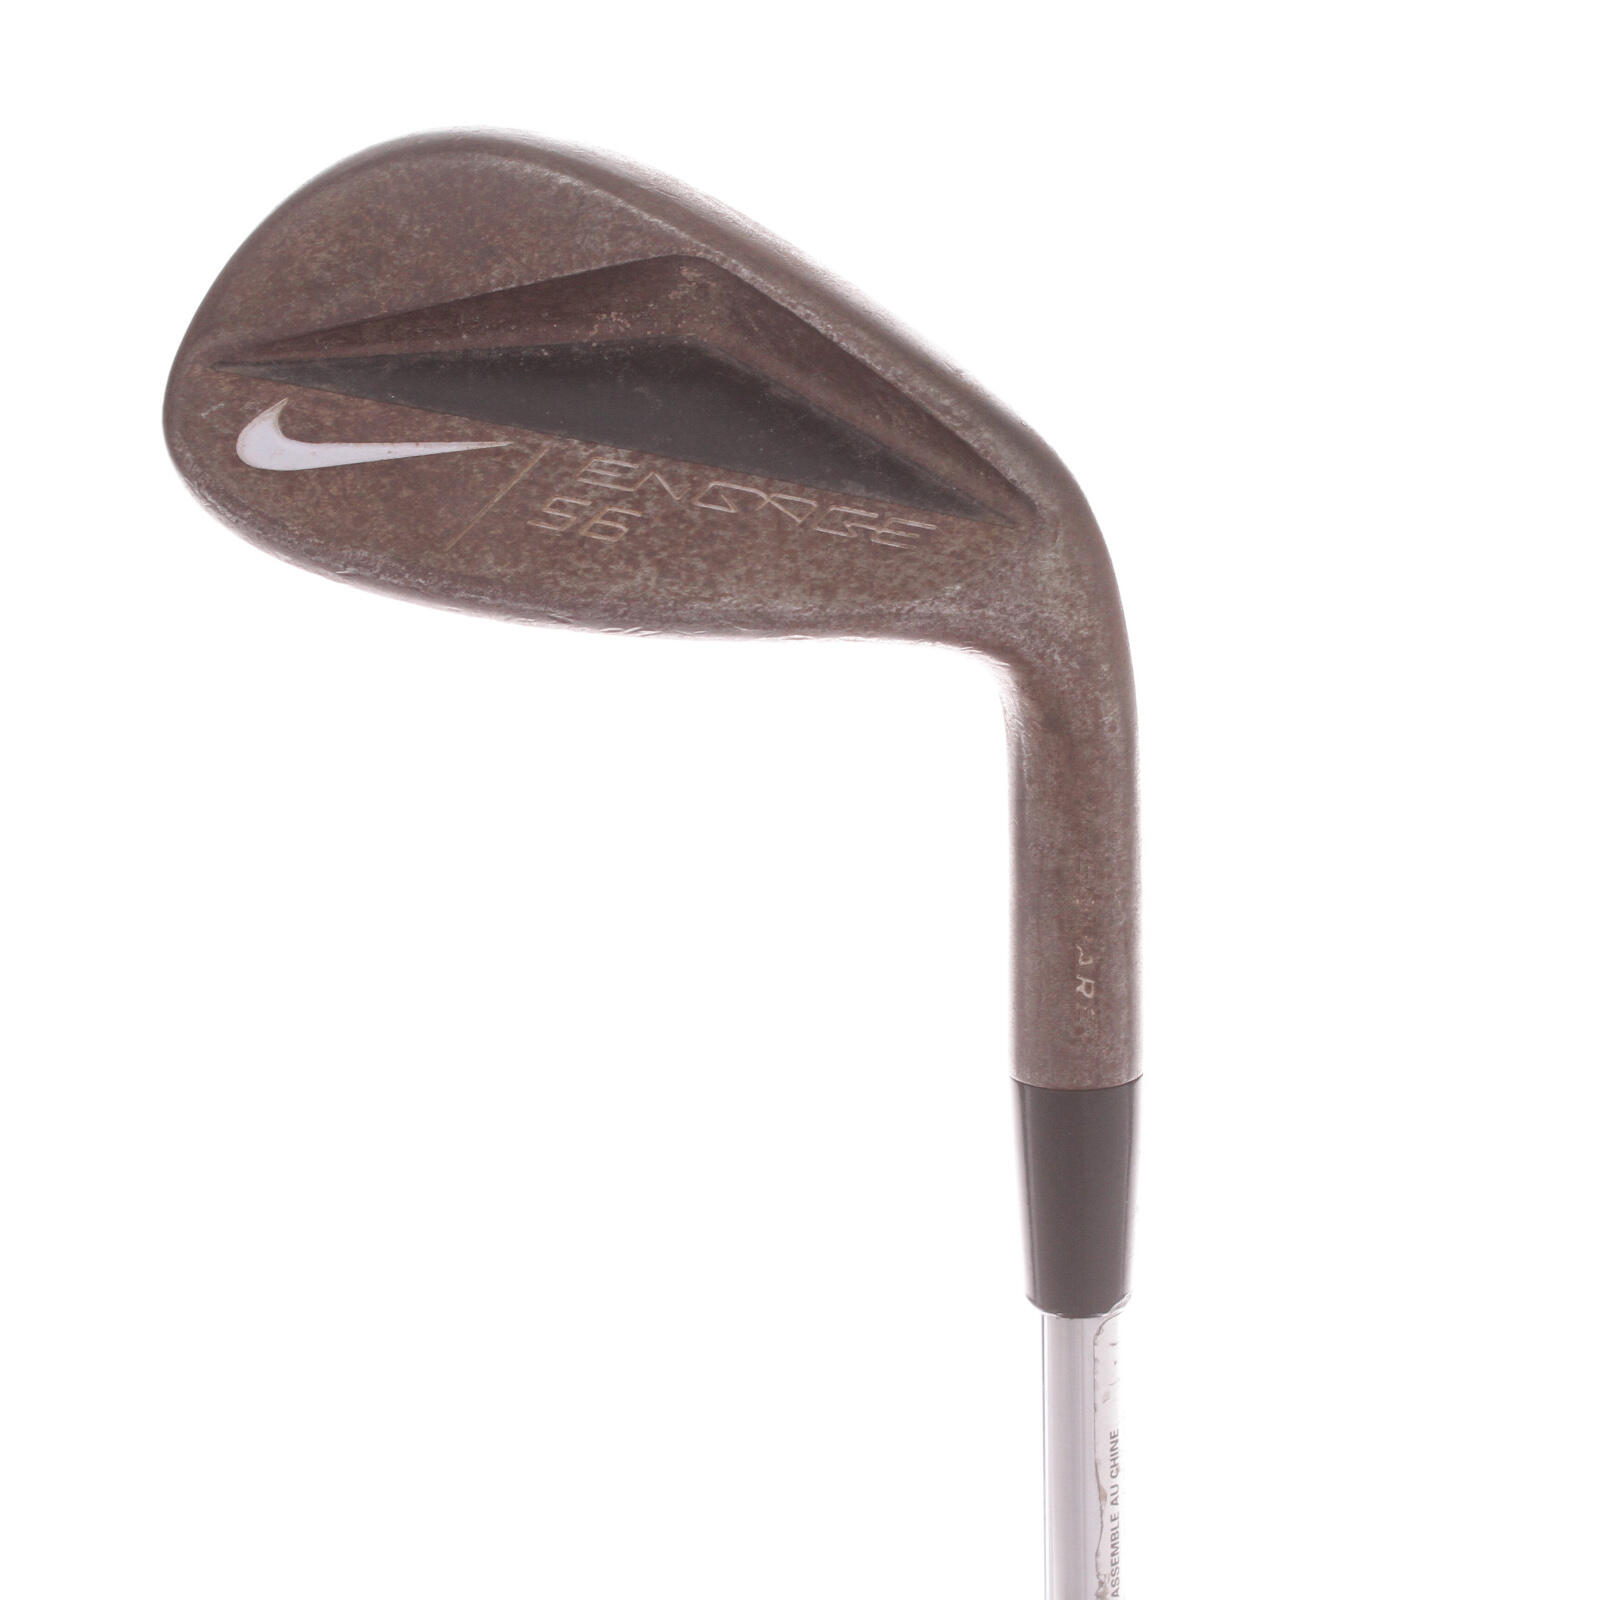 NIKE USED - Sand Wedge Nike Engage 56* Steel Shaft Right Handed - GRADE C